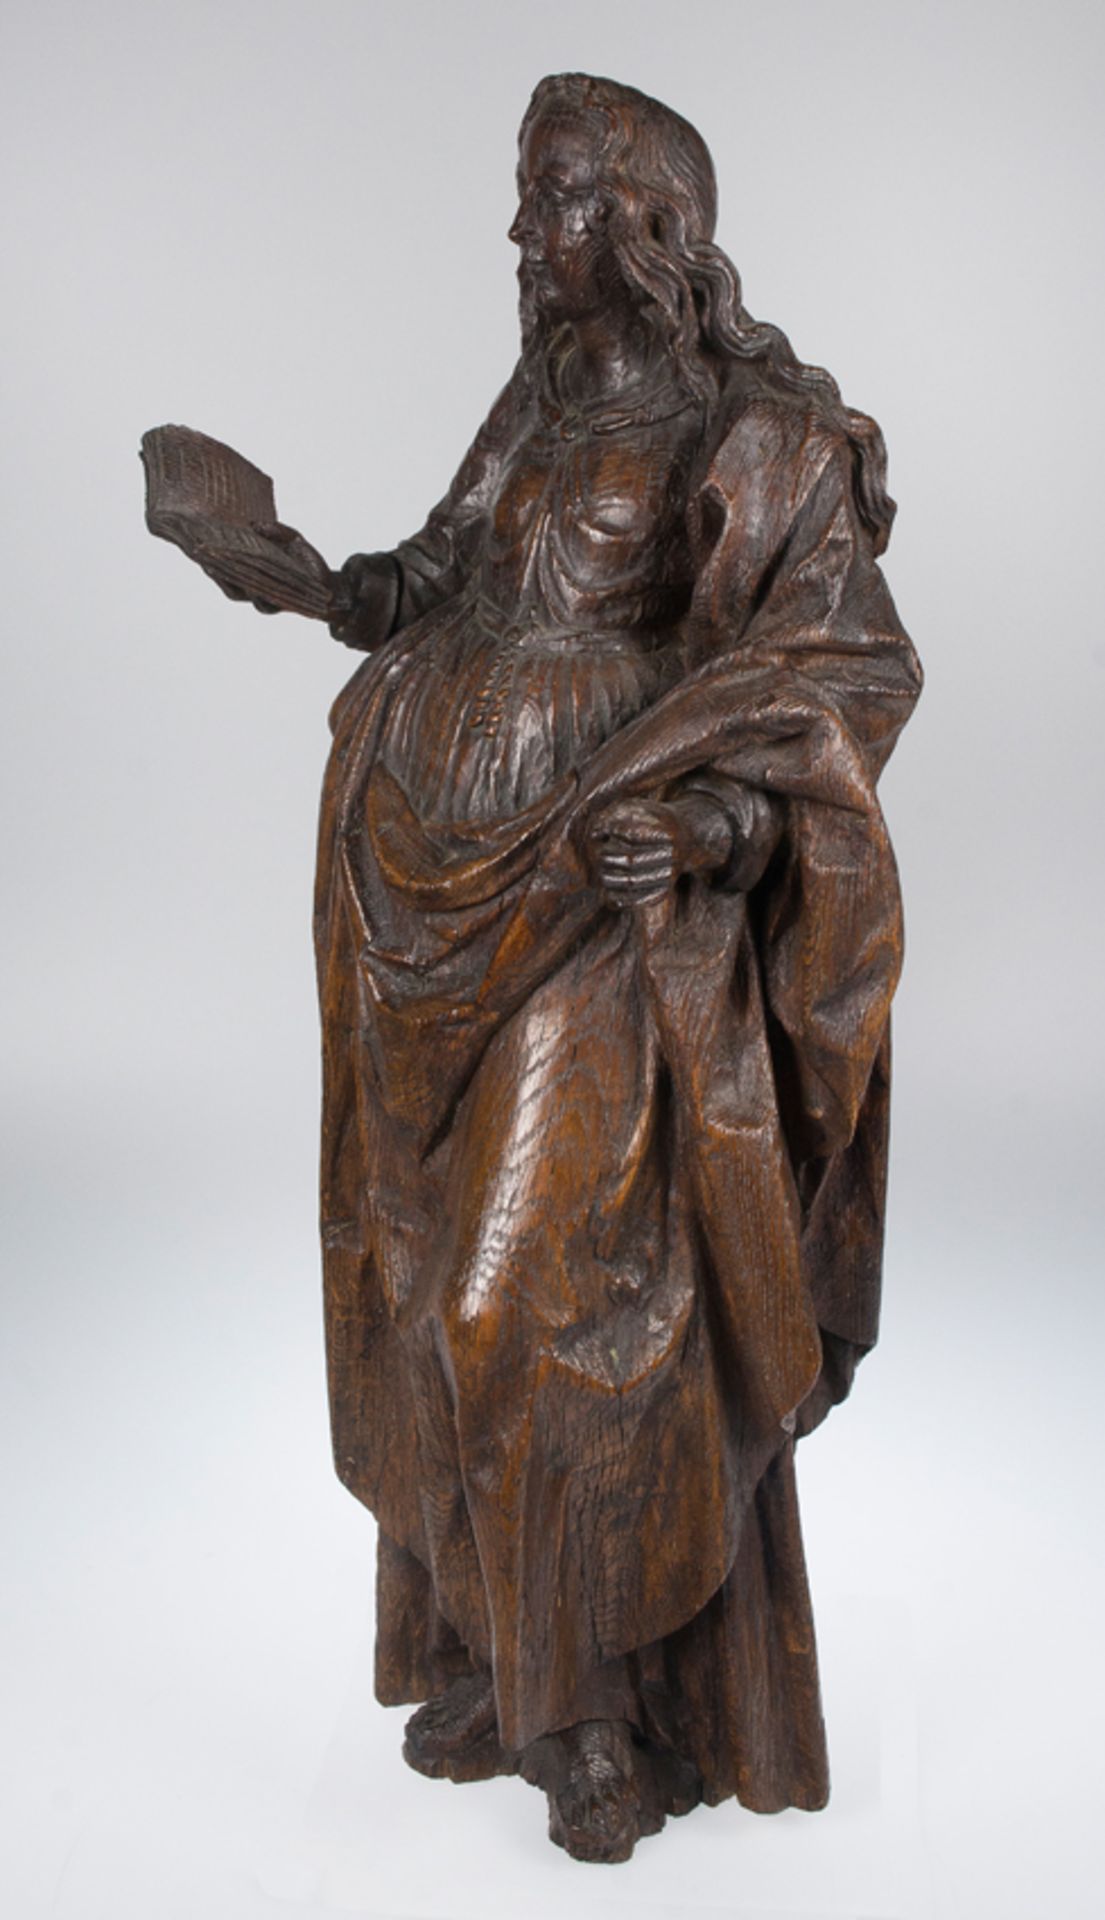 "Saint Barbara". Carved, wooden sculpture. Flemish School. 15th - 16th century. - Image 2 of 6